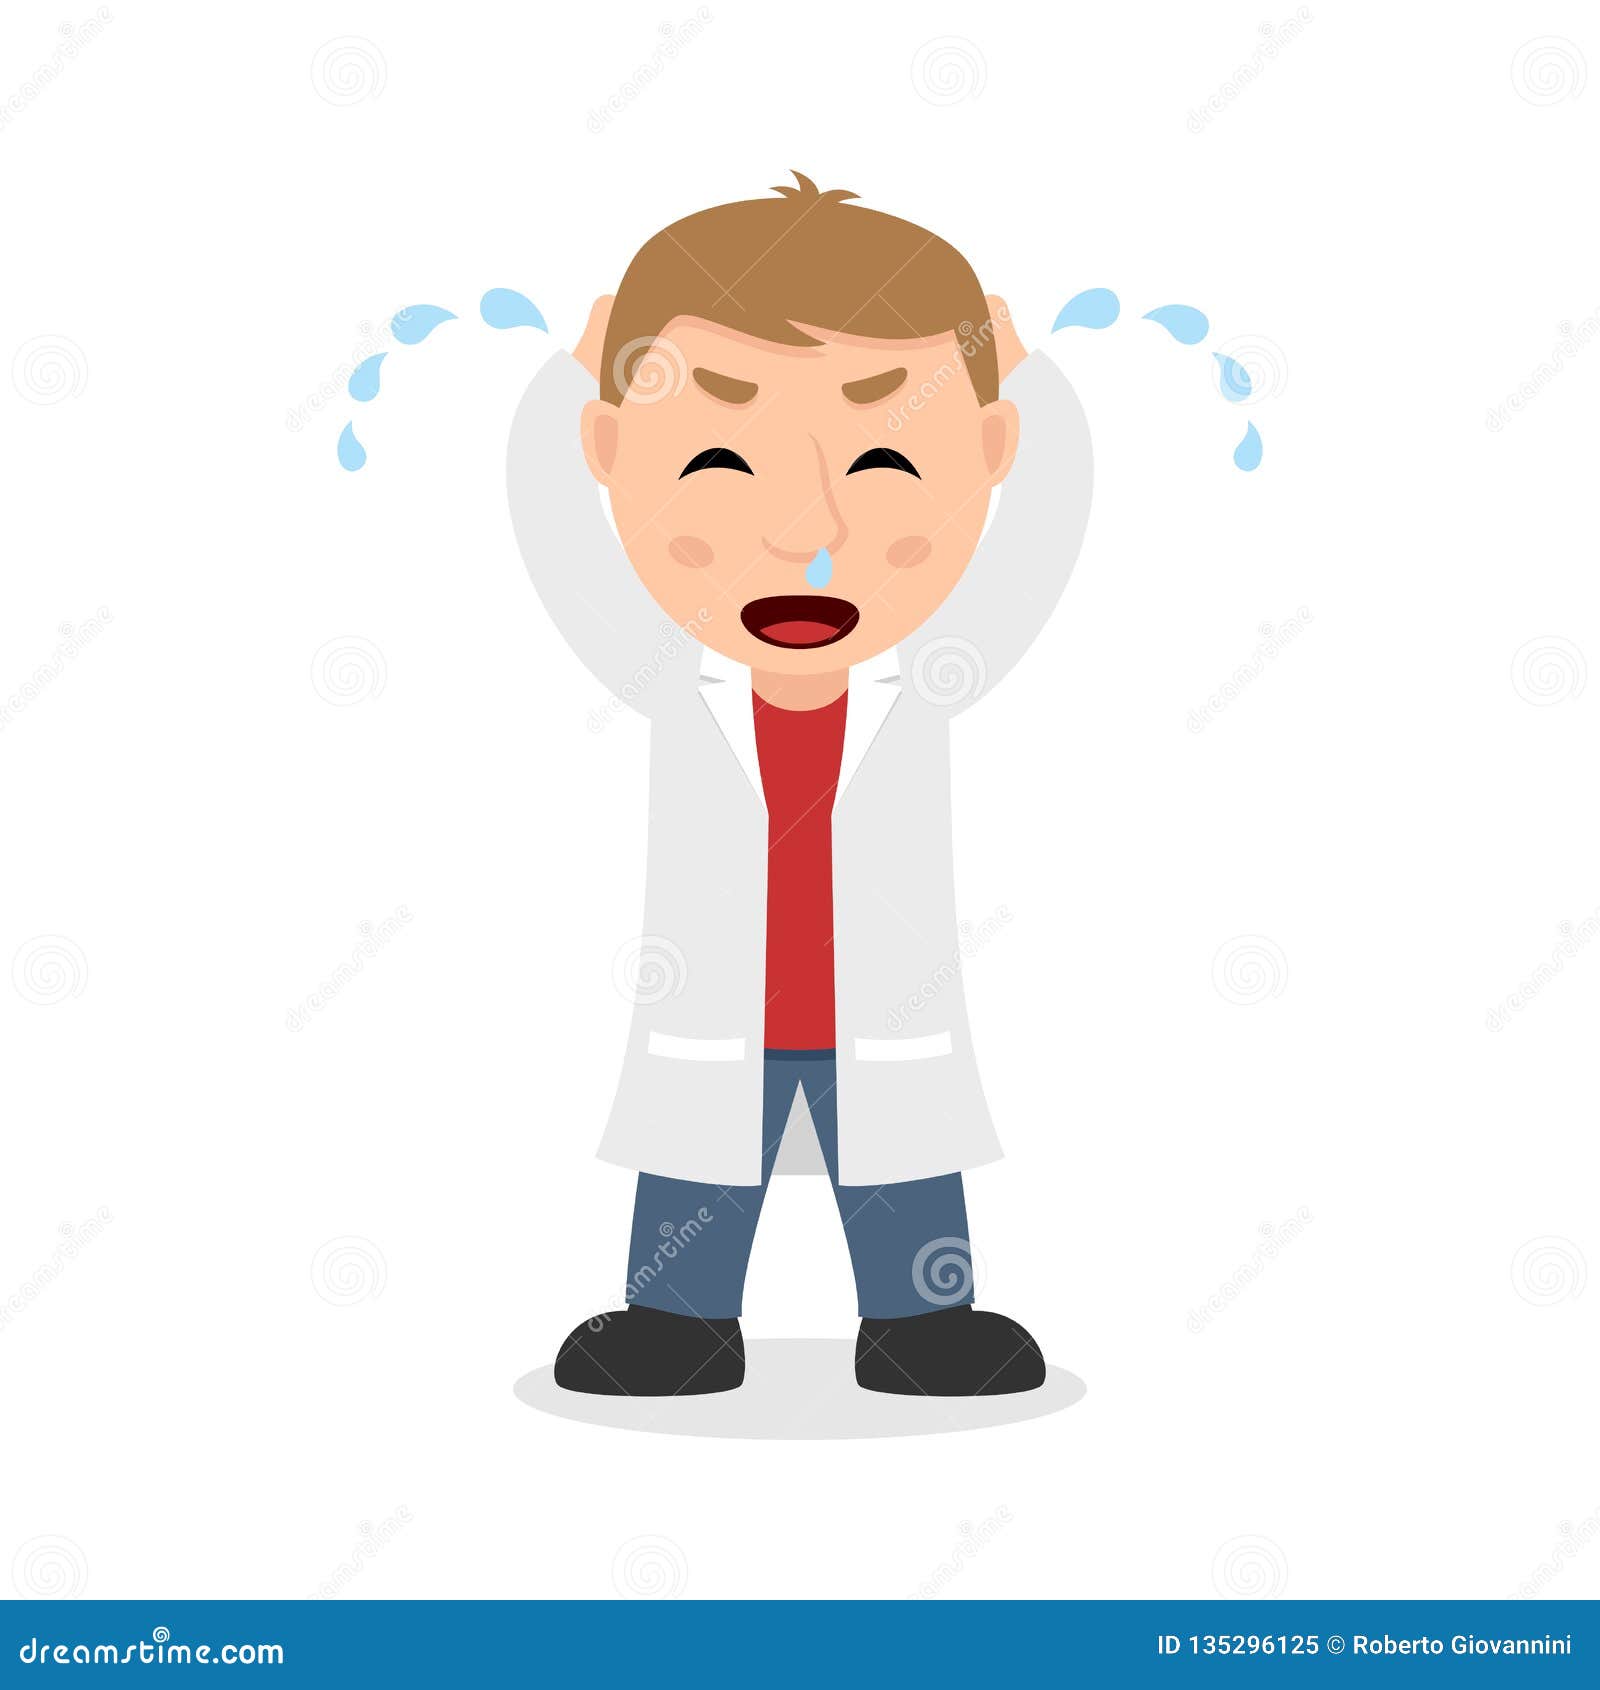 Crying Male Doctor Cartoon Character Stock Vector - Illustration of  graphic, occupation: 135296125